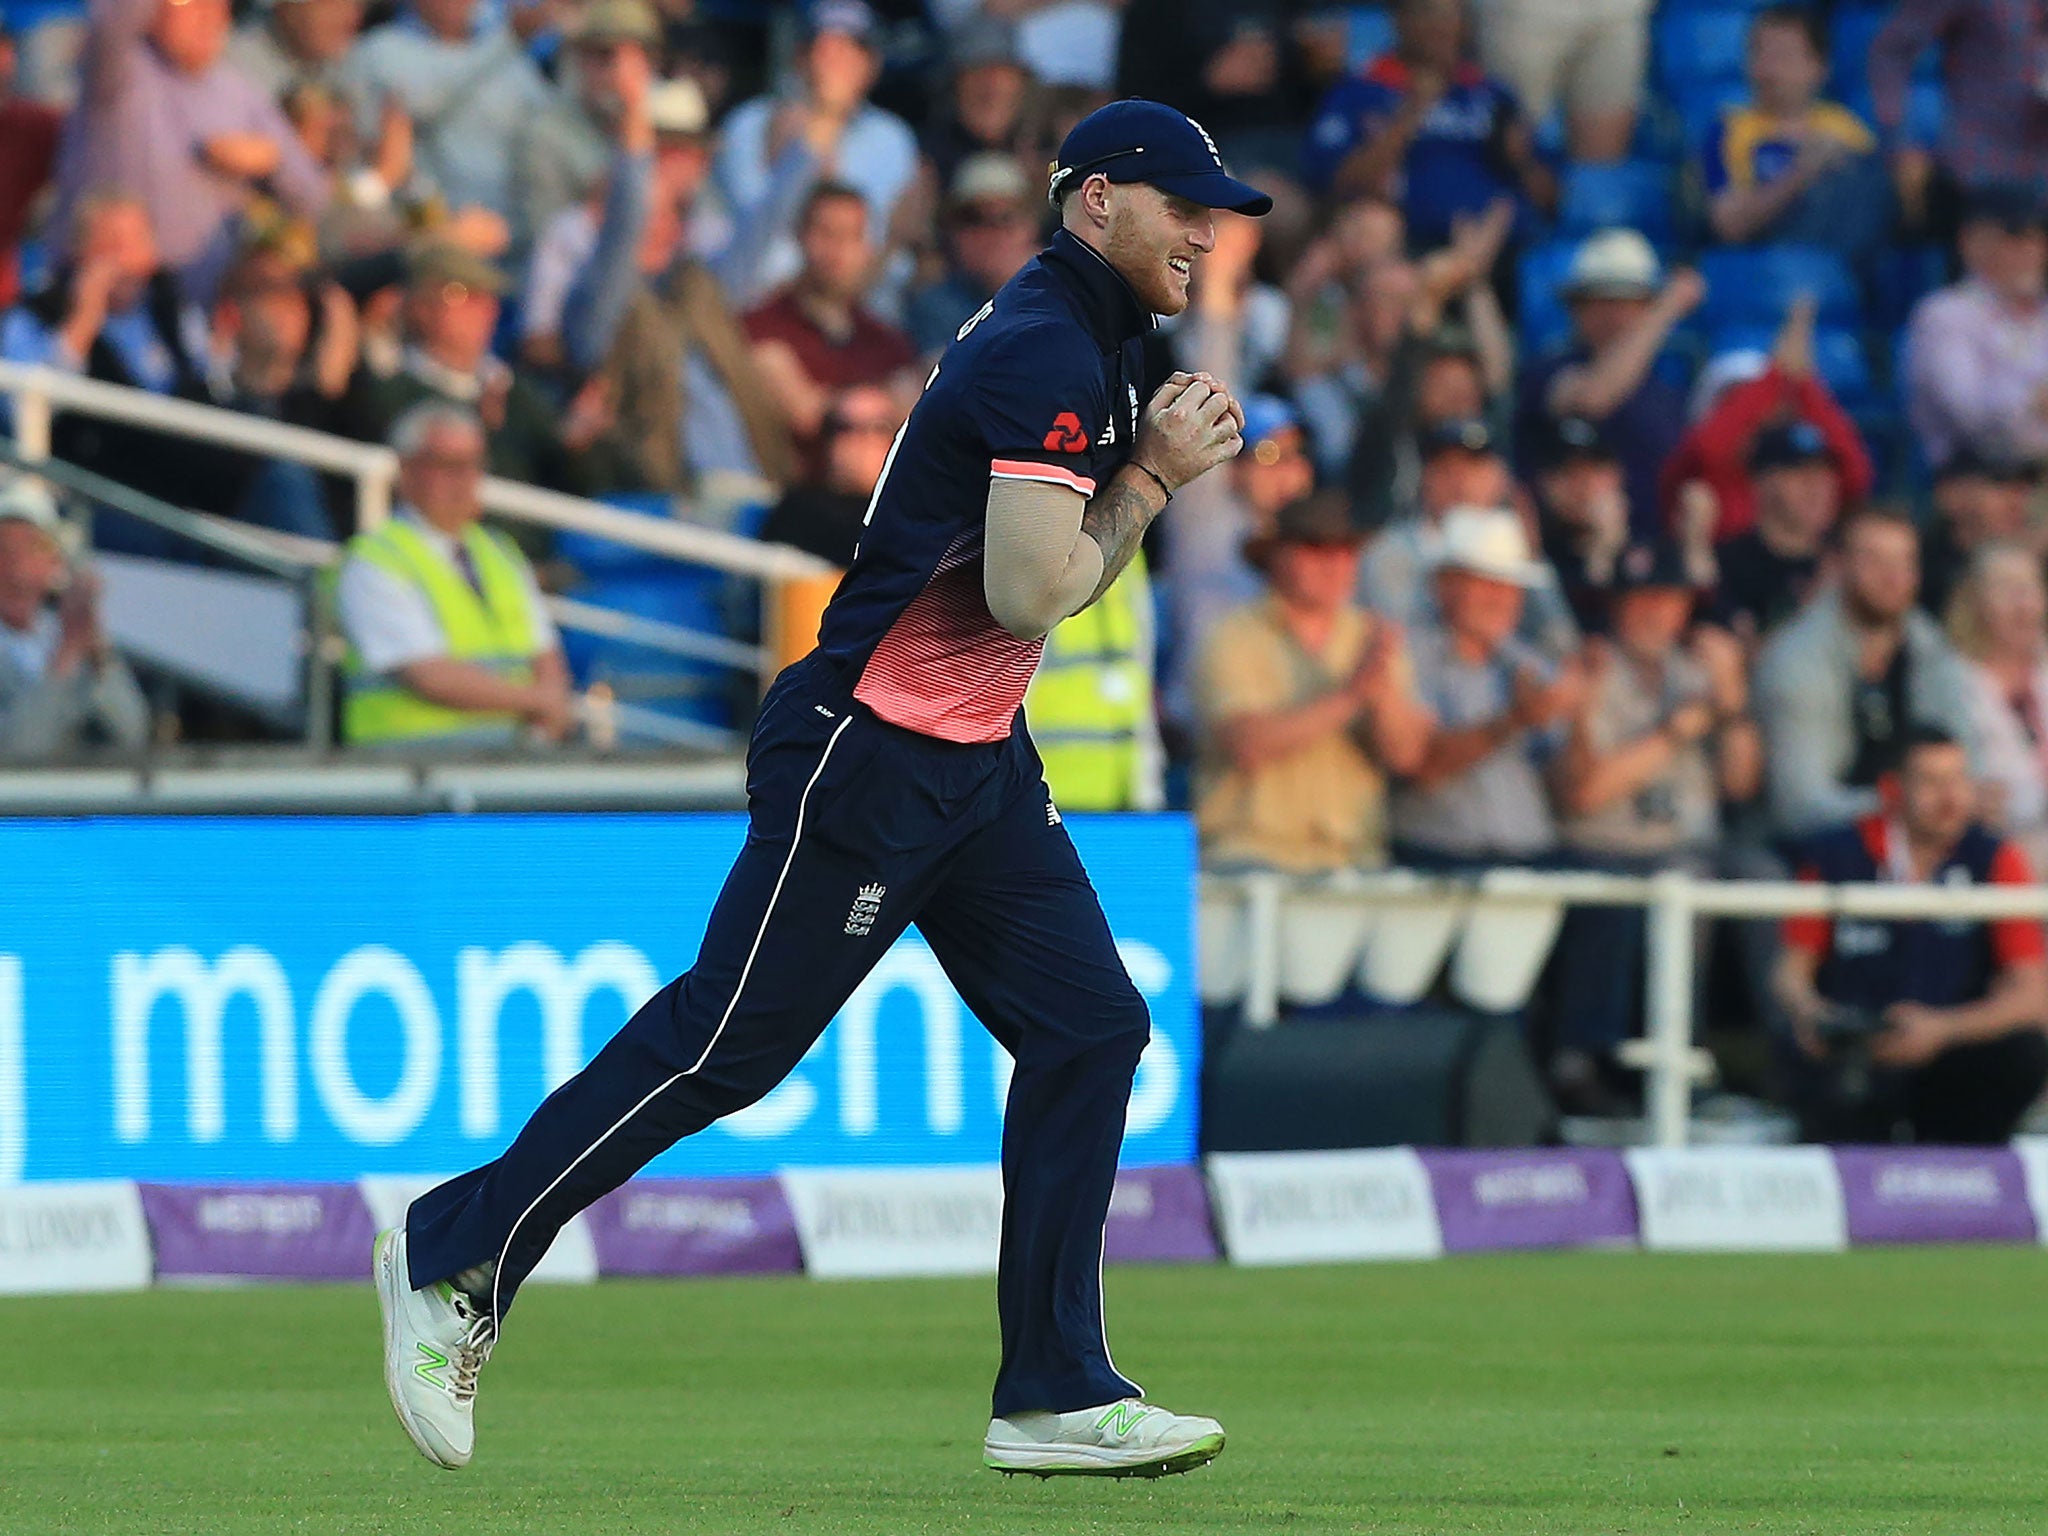 Ben Stokes suffered from a sore knee in the first ODI against South Africa